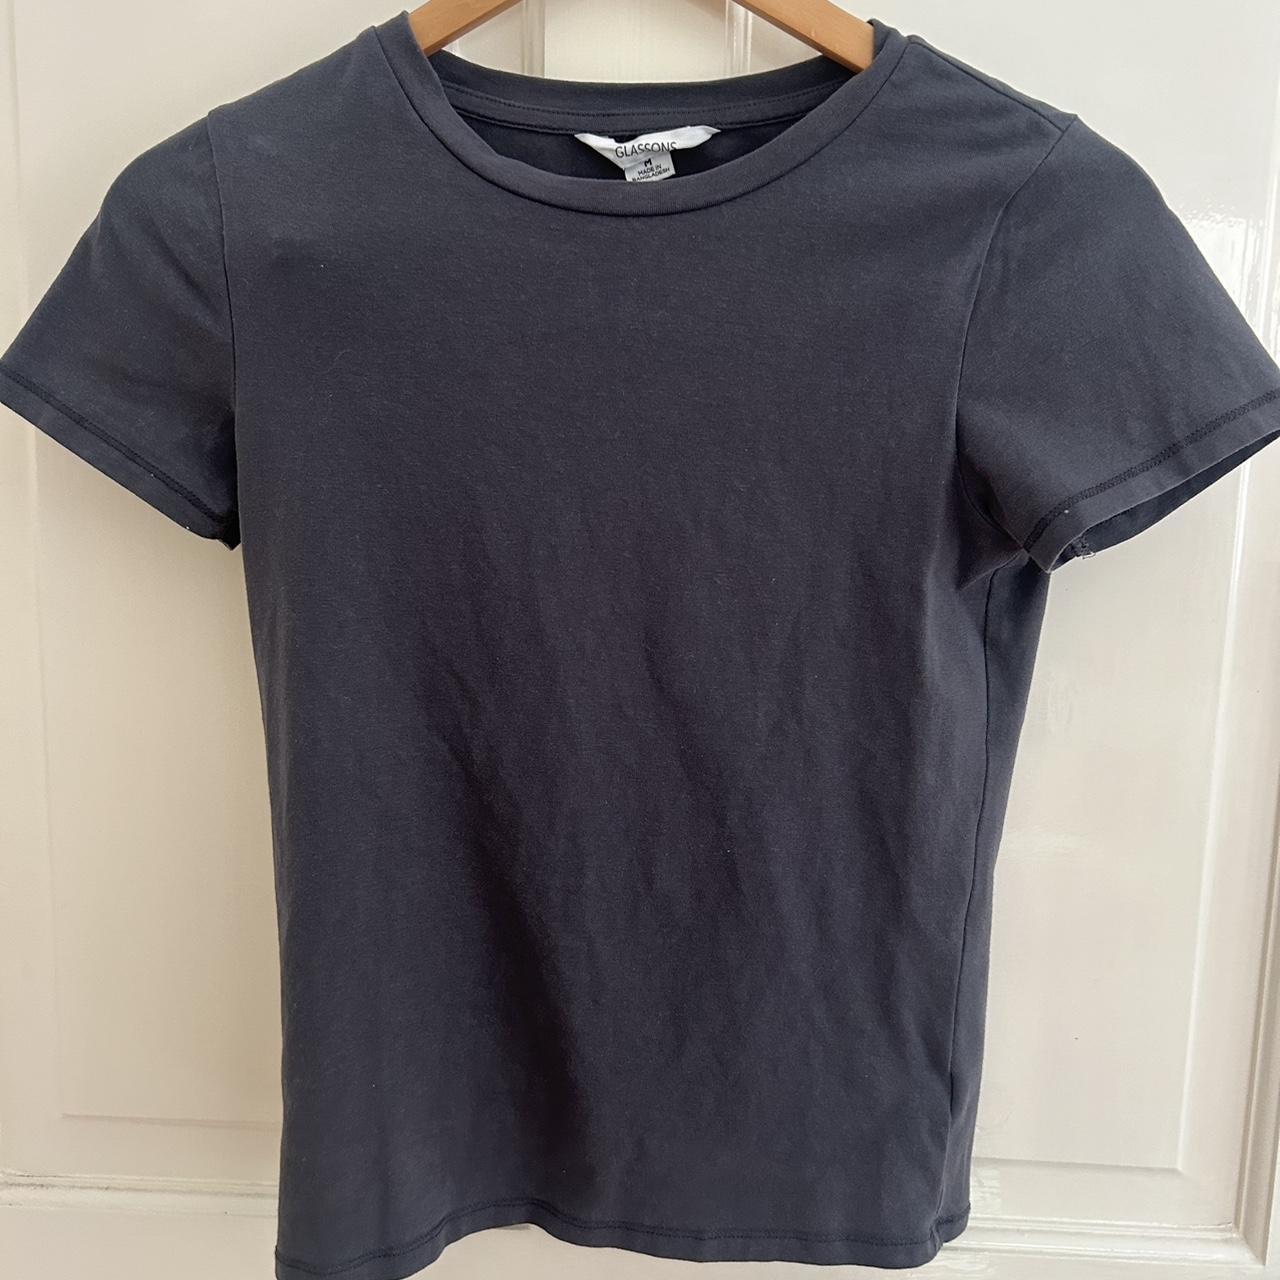 glassons tees grey and white size medium never... - Depop